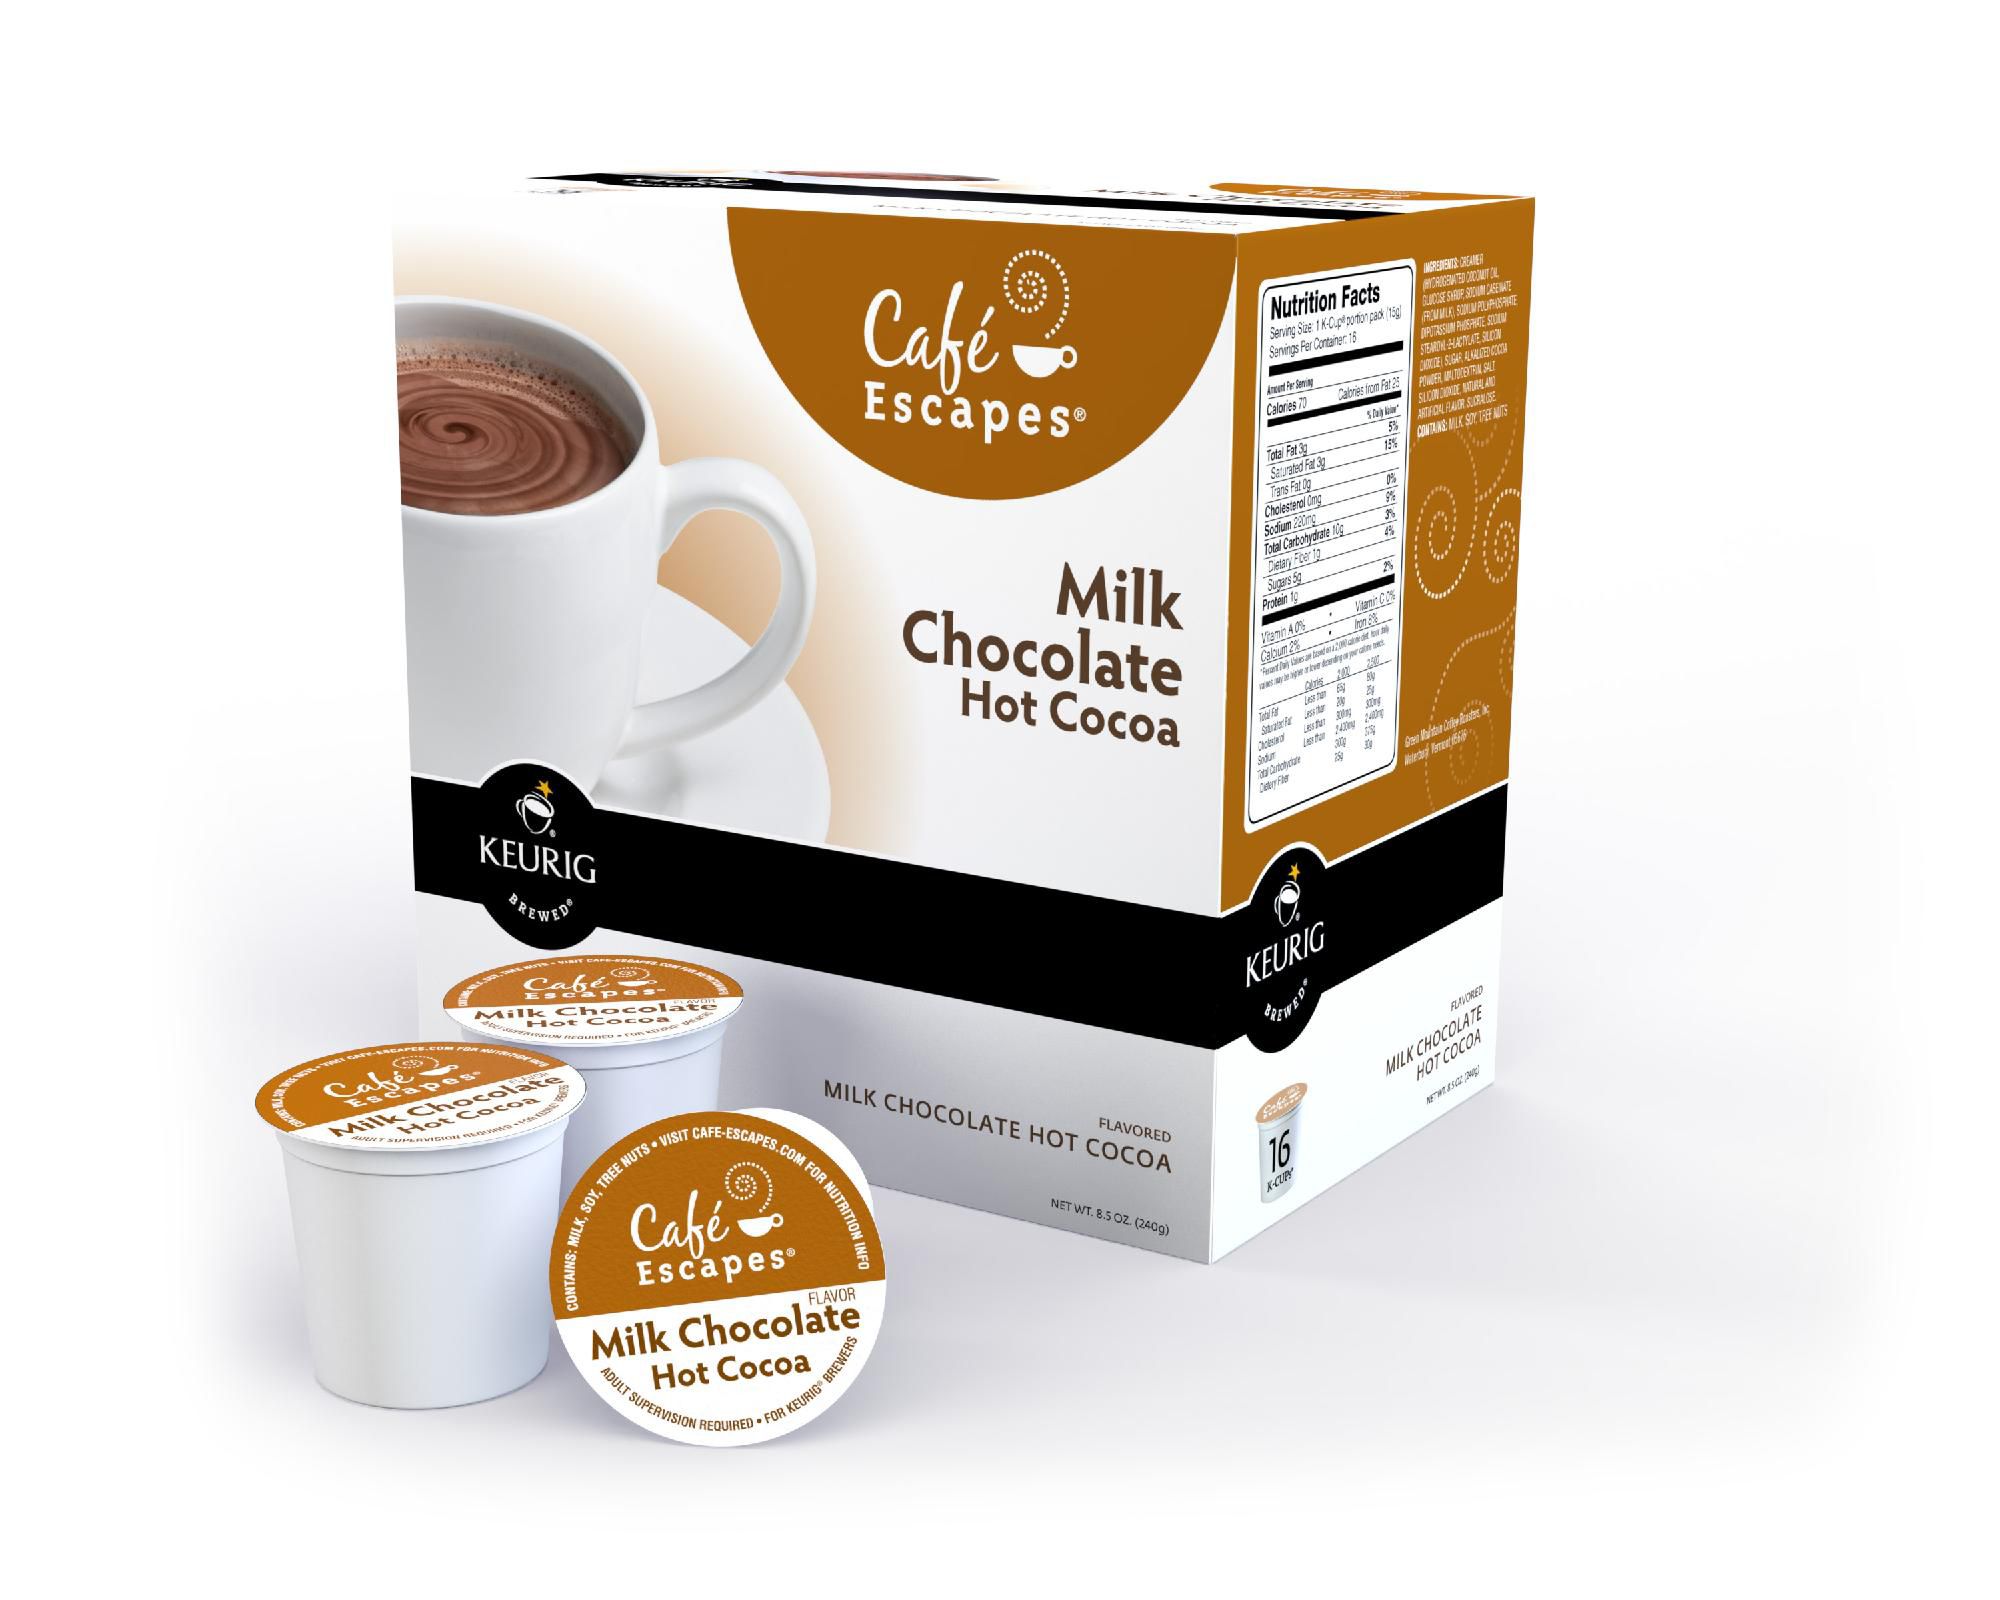 Milk Chocolate Hot Cocoa For Keurig K-Cup Brewing System, 96-pk